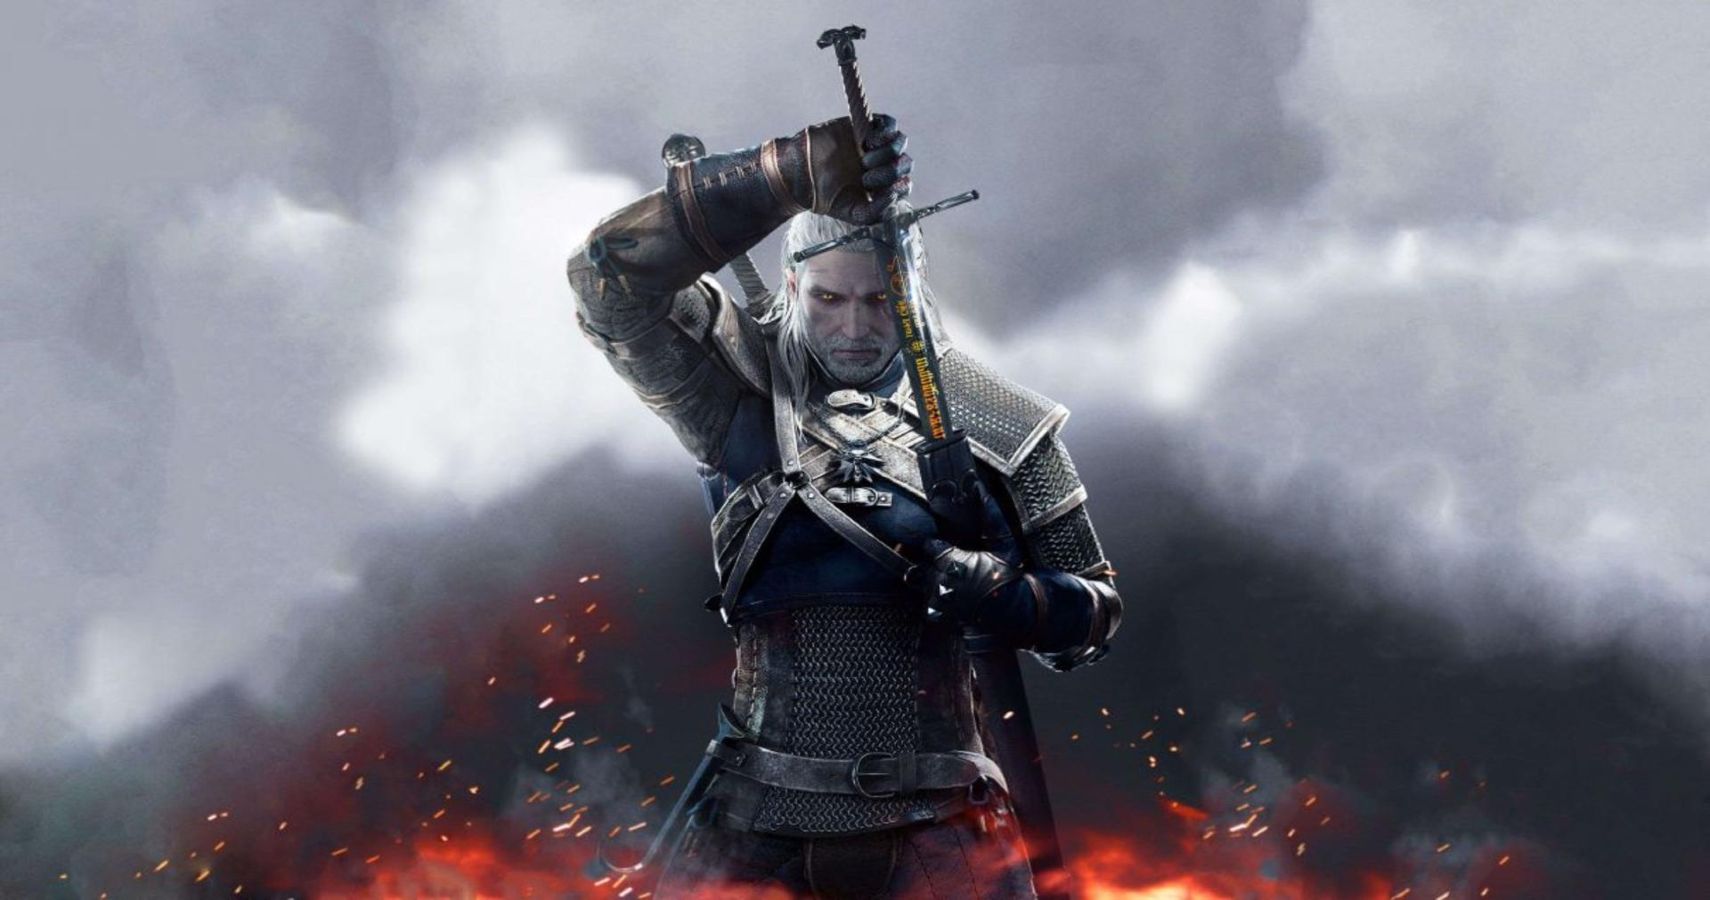 The 5 Strongest Weapons In The Witcher 3 (& The 5 Weakest)